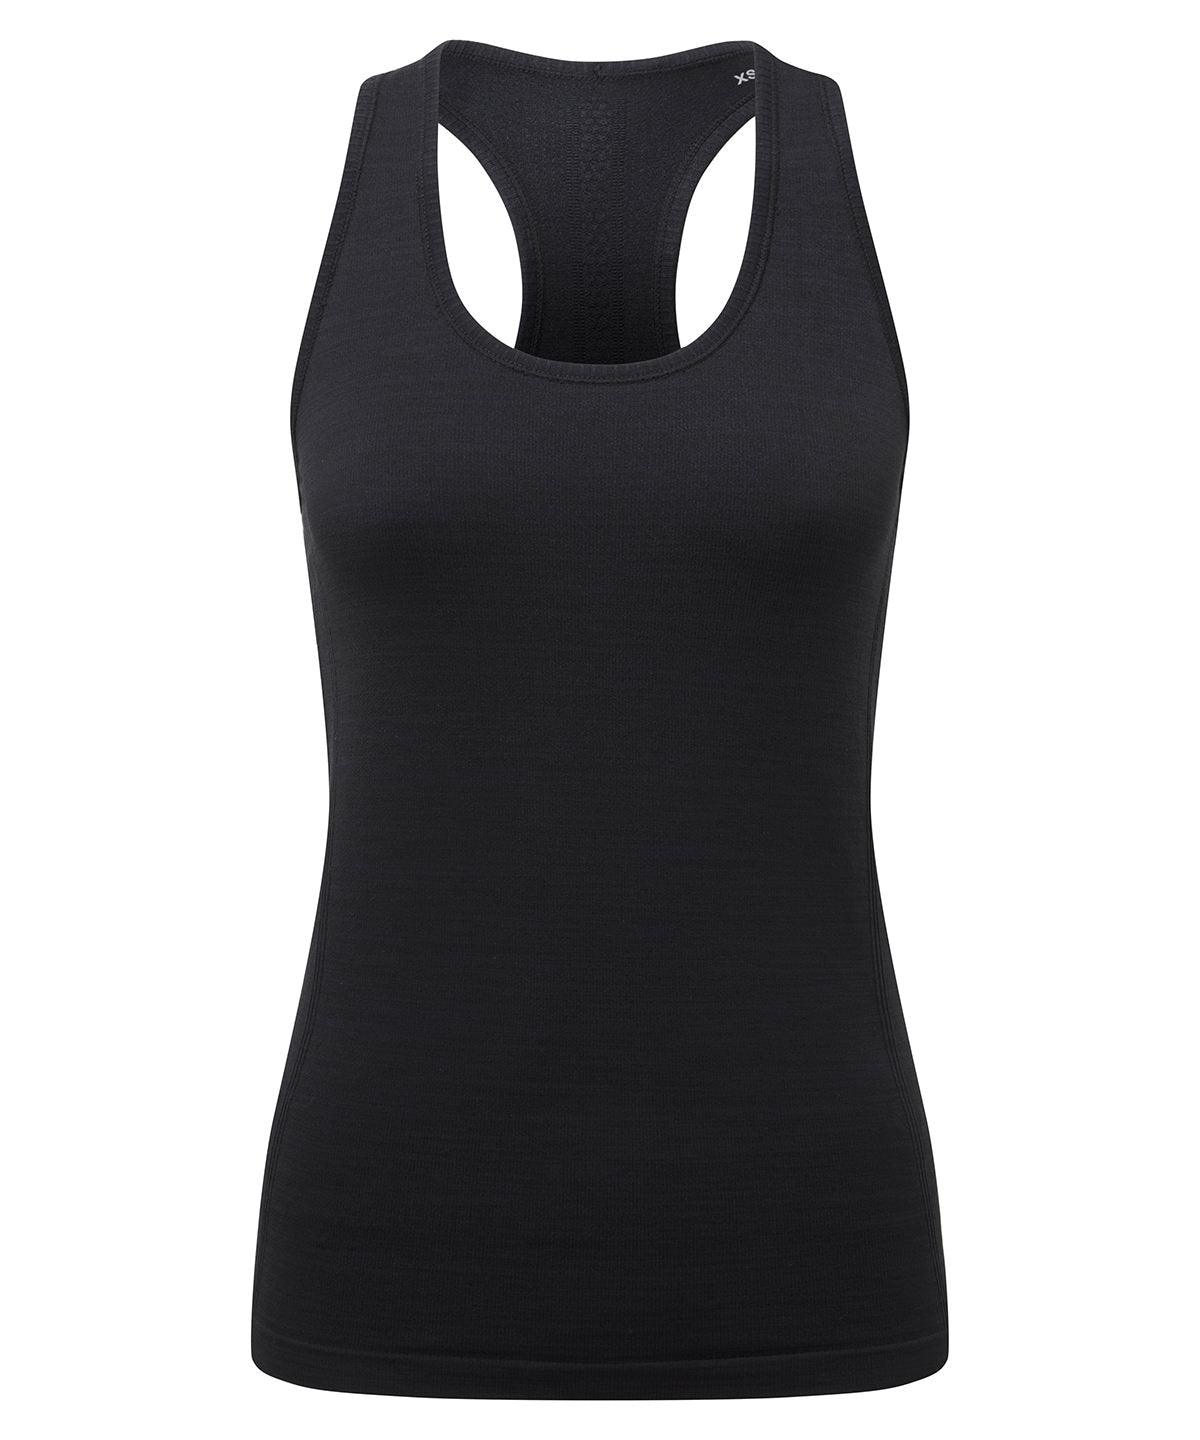 Black - Women's TriDri® recycled seamless 3D fit multi-sport flex vest Vests TriDri® Activewear & Performance, Back to the Gym, Co-ords, Exclusives, New Styles For 2022, Organic & Conscious, Women's Fashion Schoolwear Centres